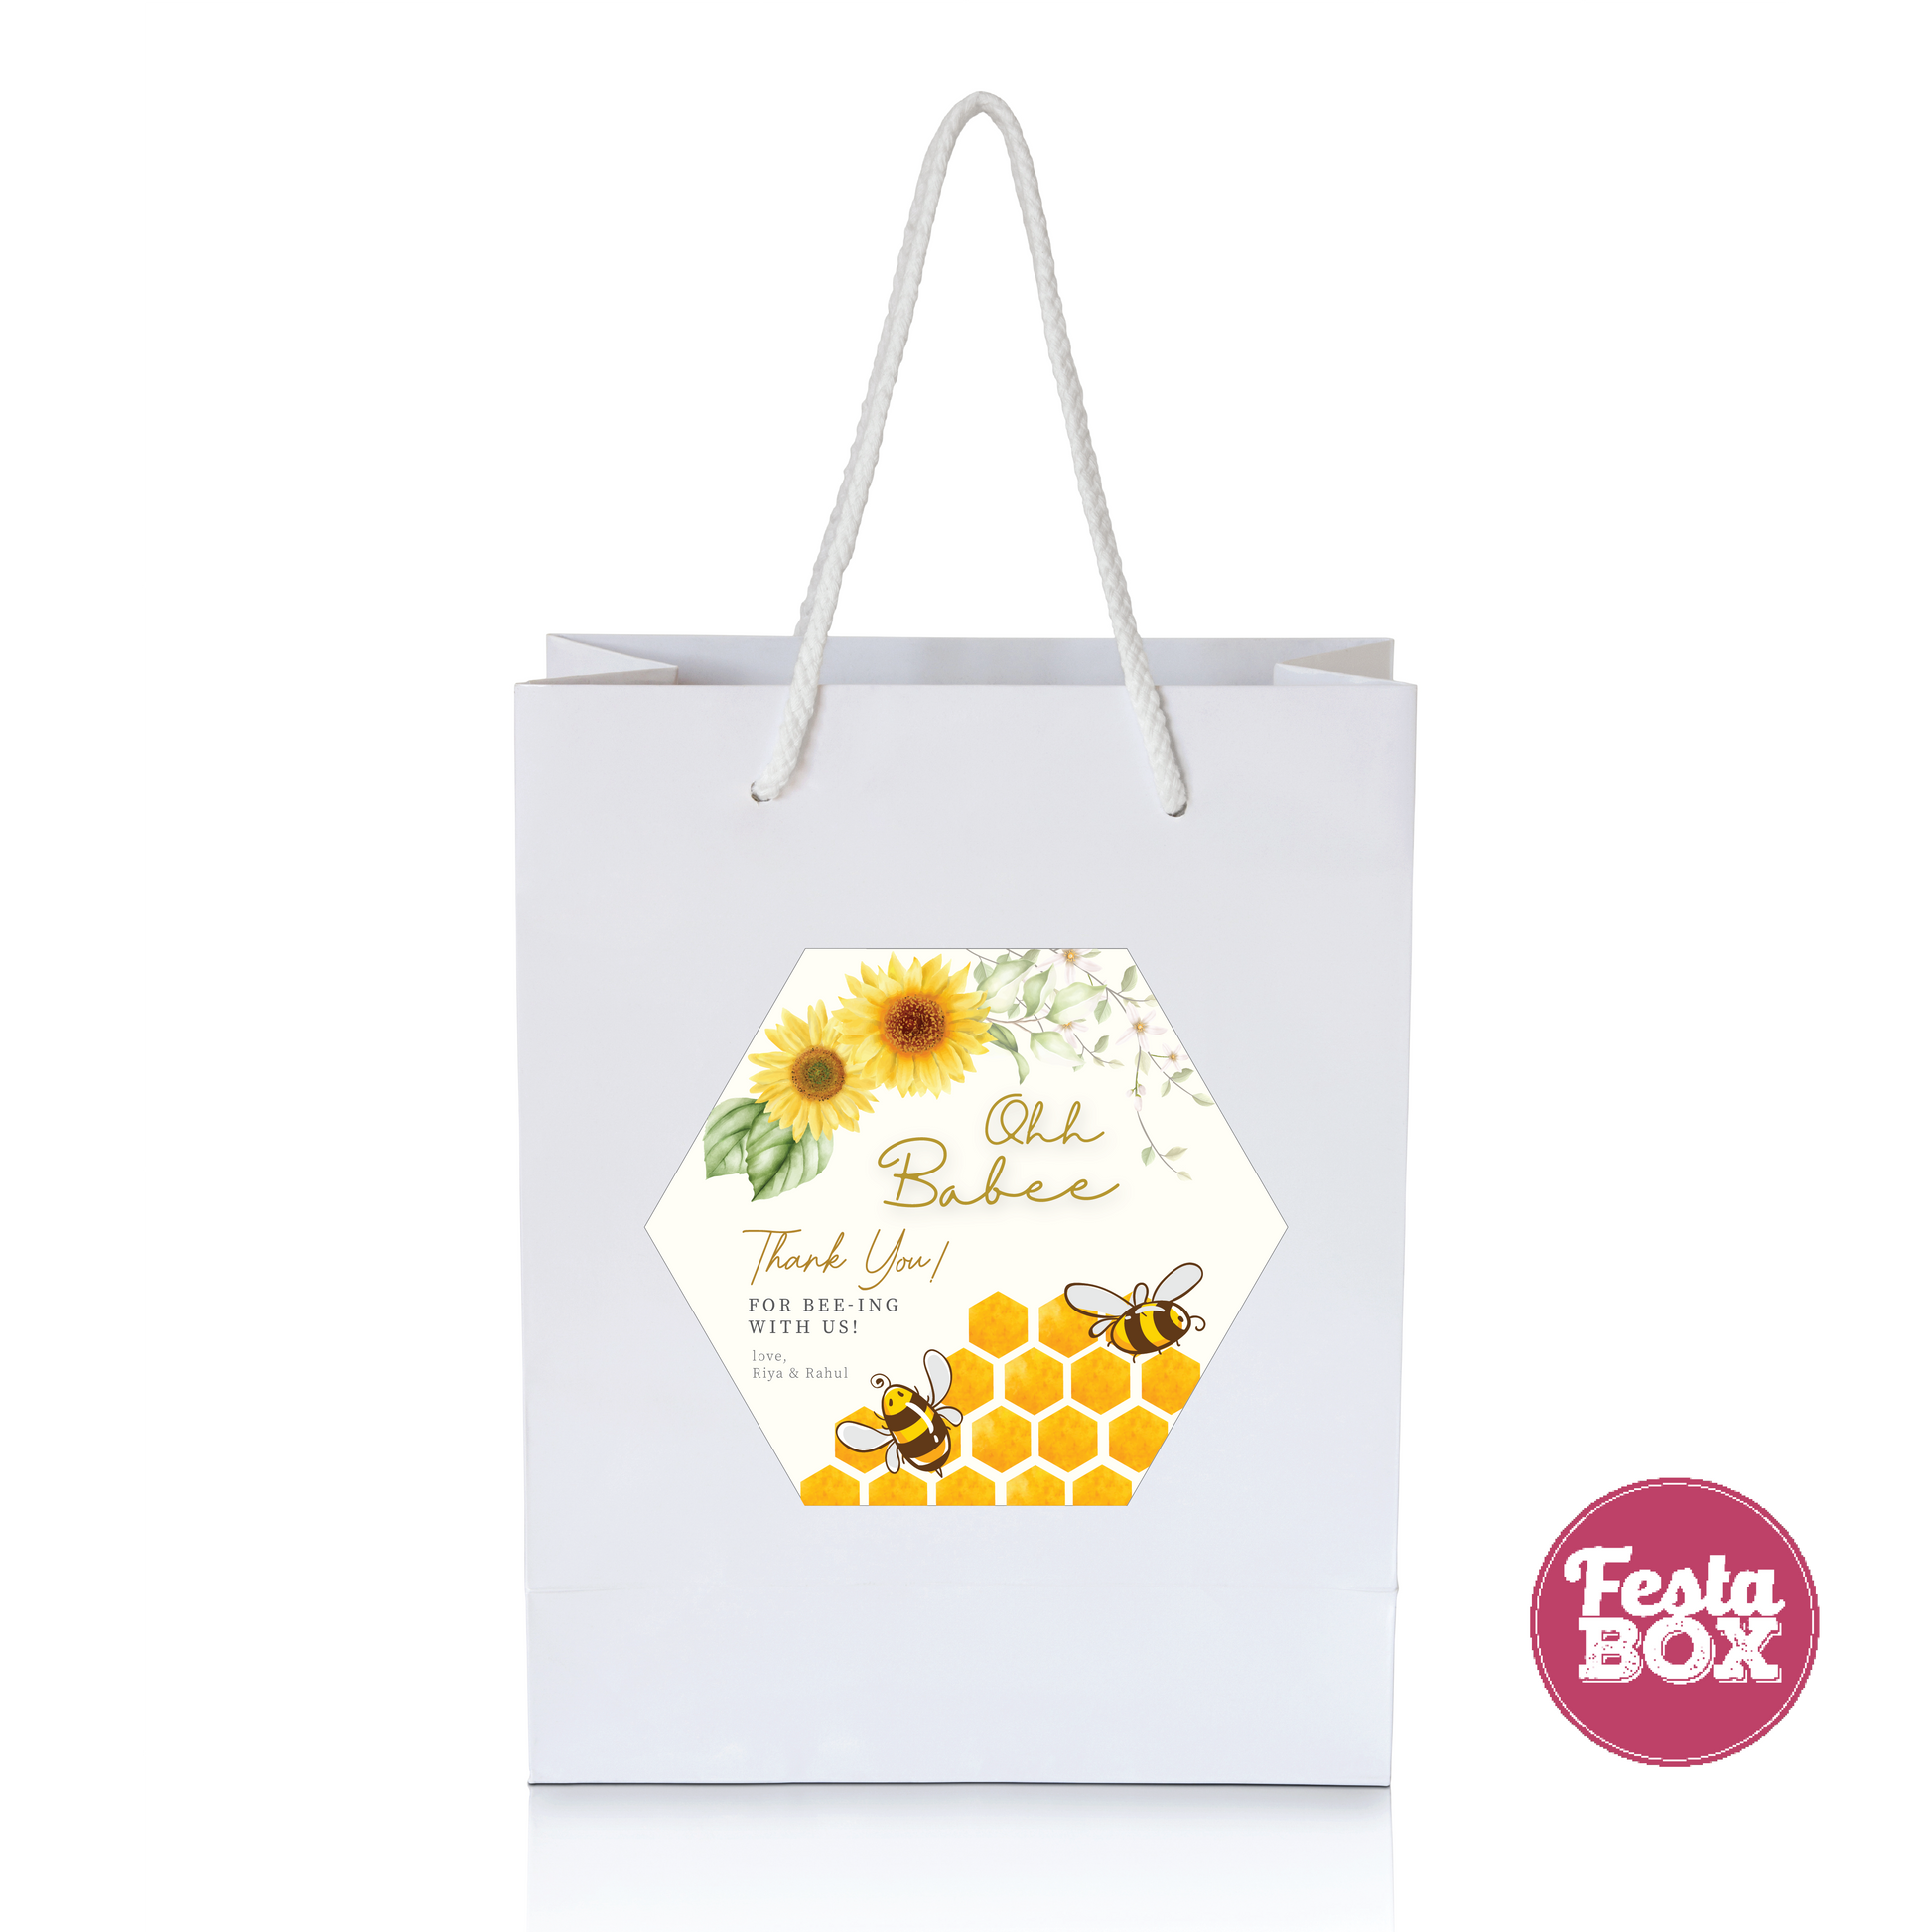 Return Gift Bags for Baby Shower – Honeybee Collection by Festabox-Option 2